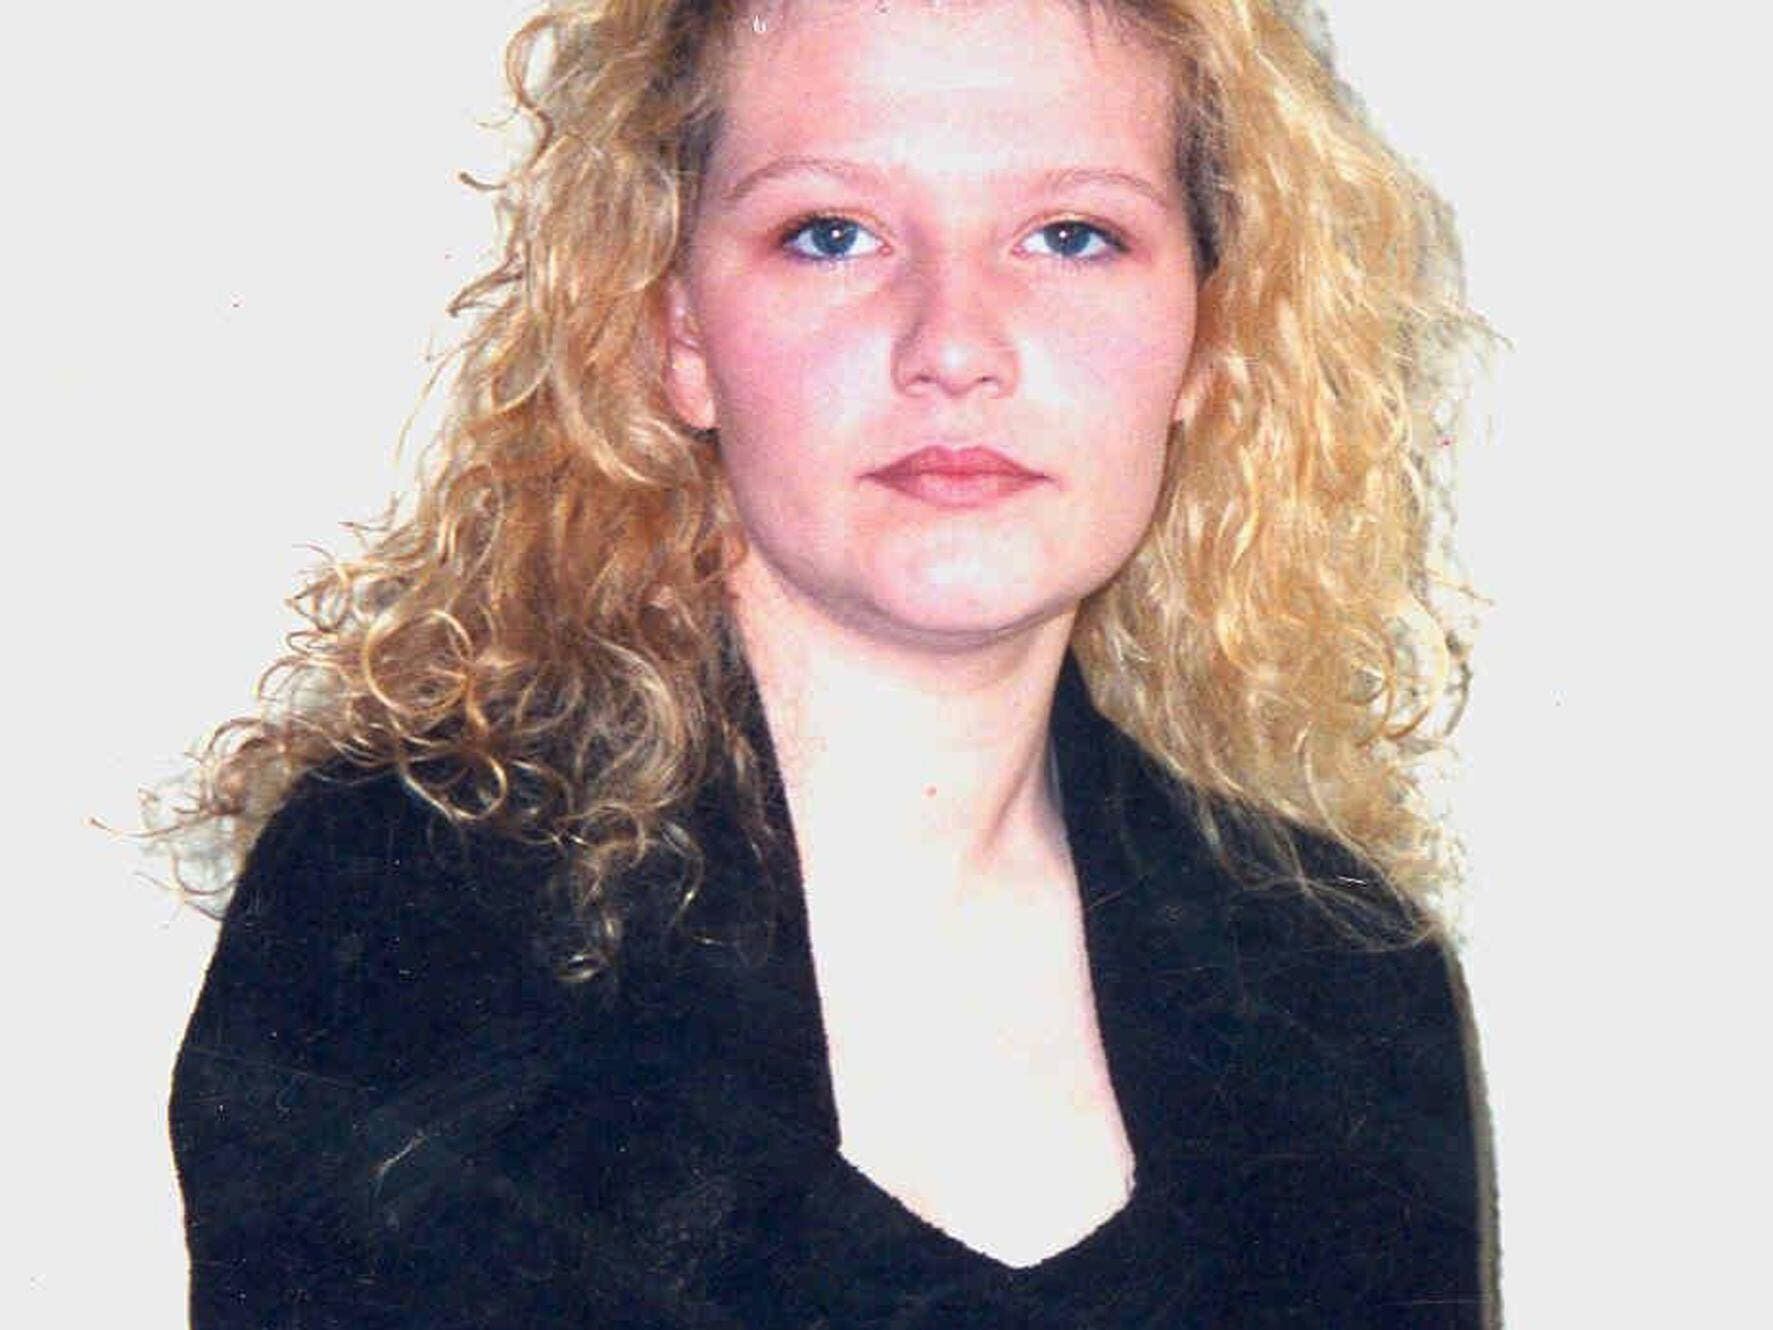 Man, 49, arrested over death of Emma Caldwell in 2005